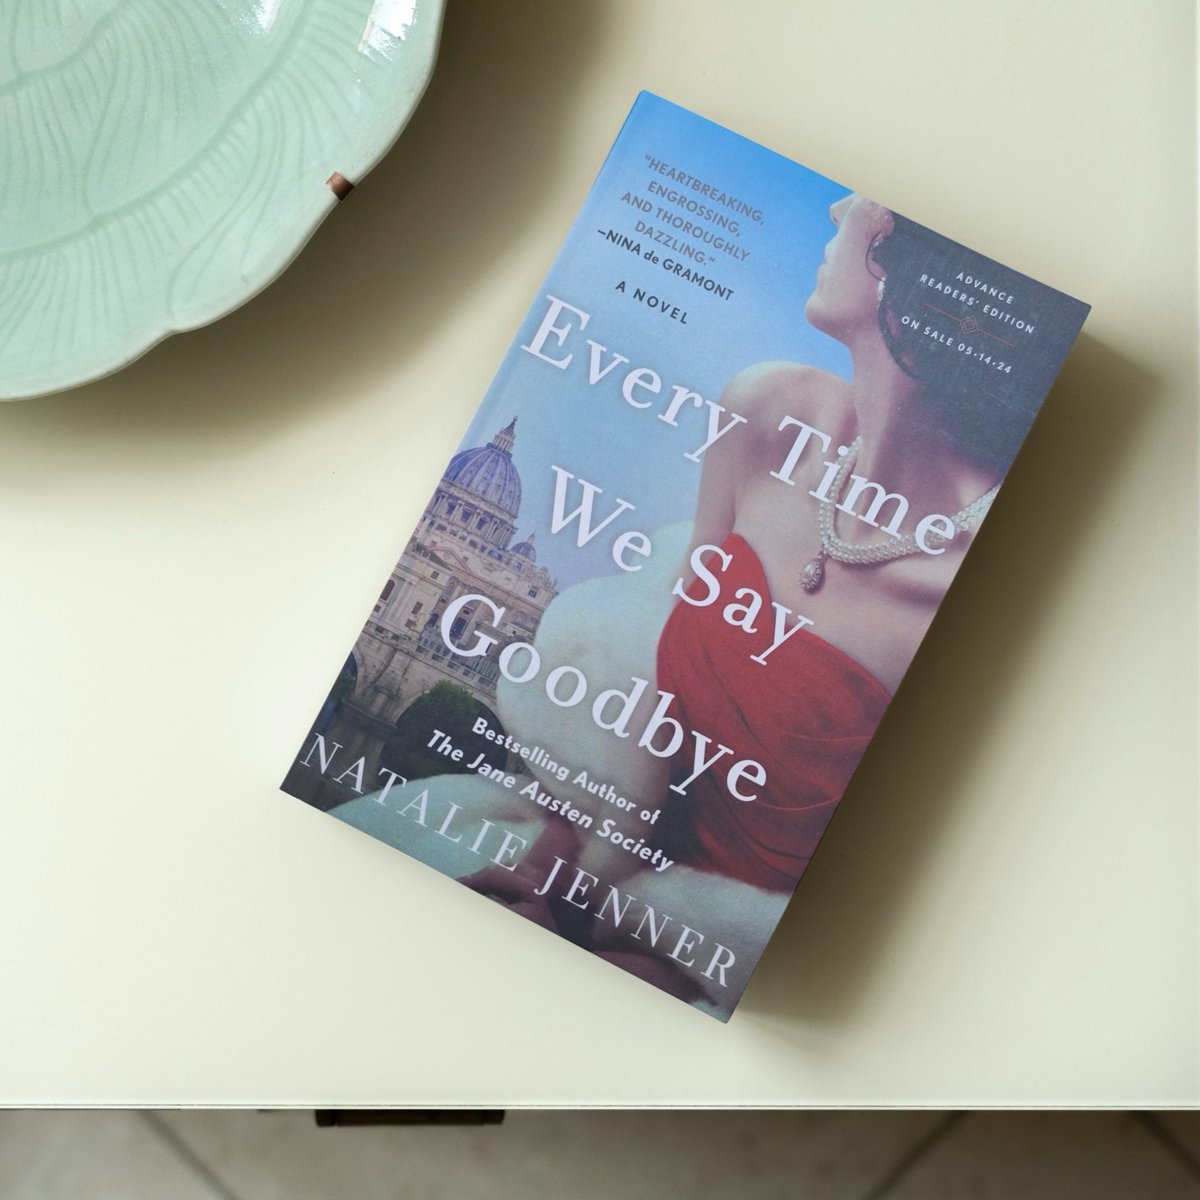 A brilliant novel of love and art, of grief and memory, of confronting the past and facing the future. Every Time We Say Goodbye (Jane Austen Society 3) by Natalie Jenner bit.ly/3VFjRrY @StMartinsPress @NatalieMJenner